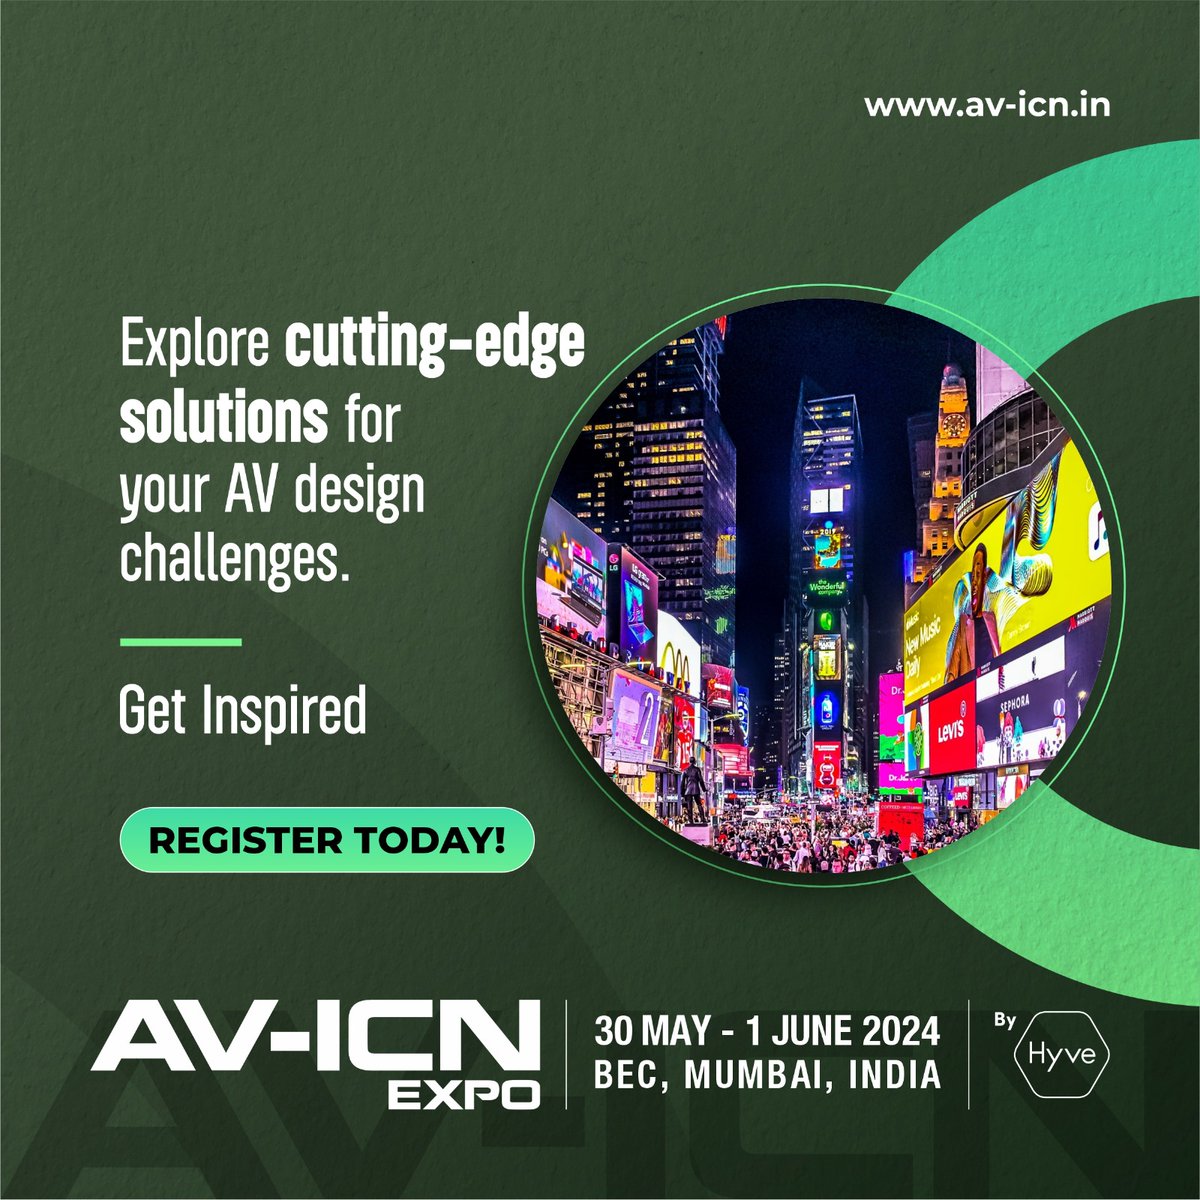 Connect with industry experts, get inspired by the latest technology, and take your projects to the next level.

Register now to elevate your AV design game! ⏩

#AVICNExpo #Innovation #EventInspiration #AVICN